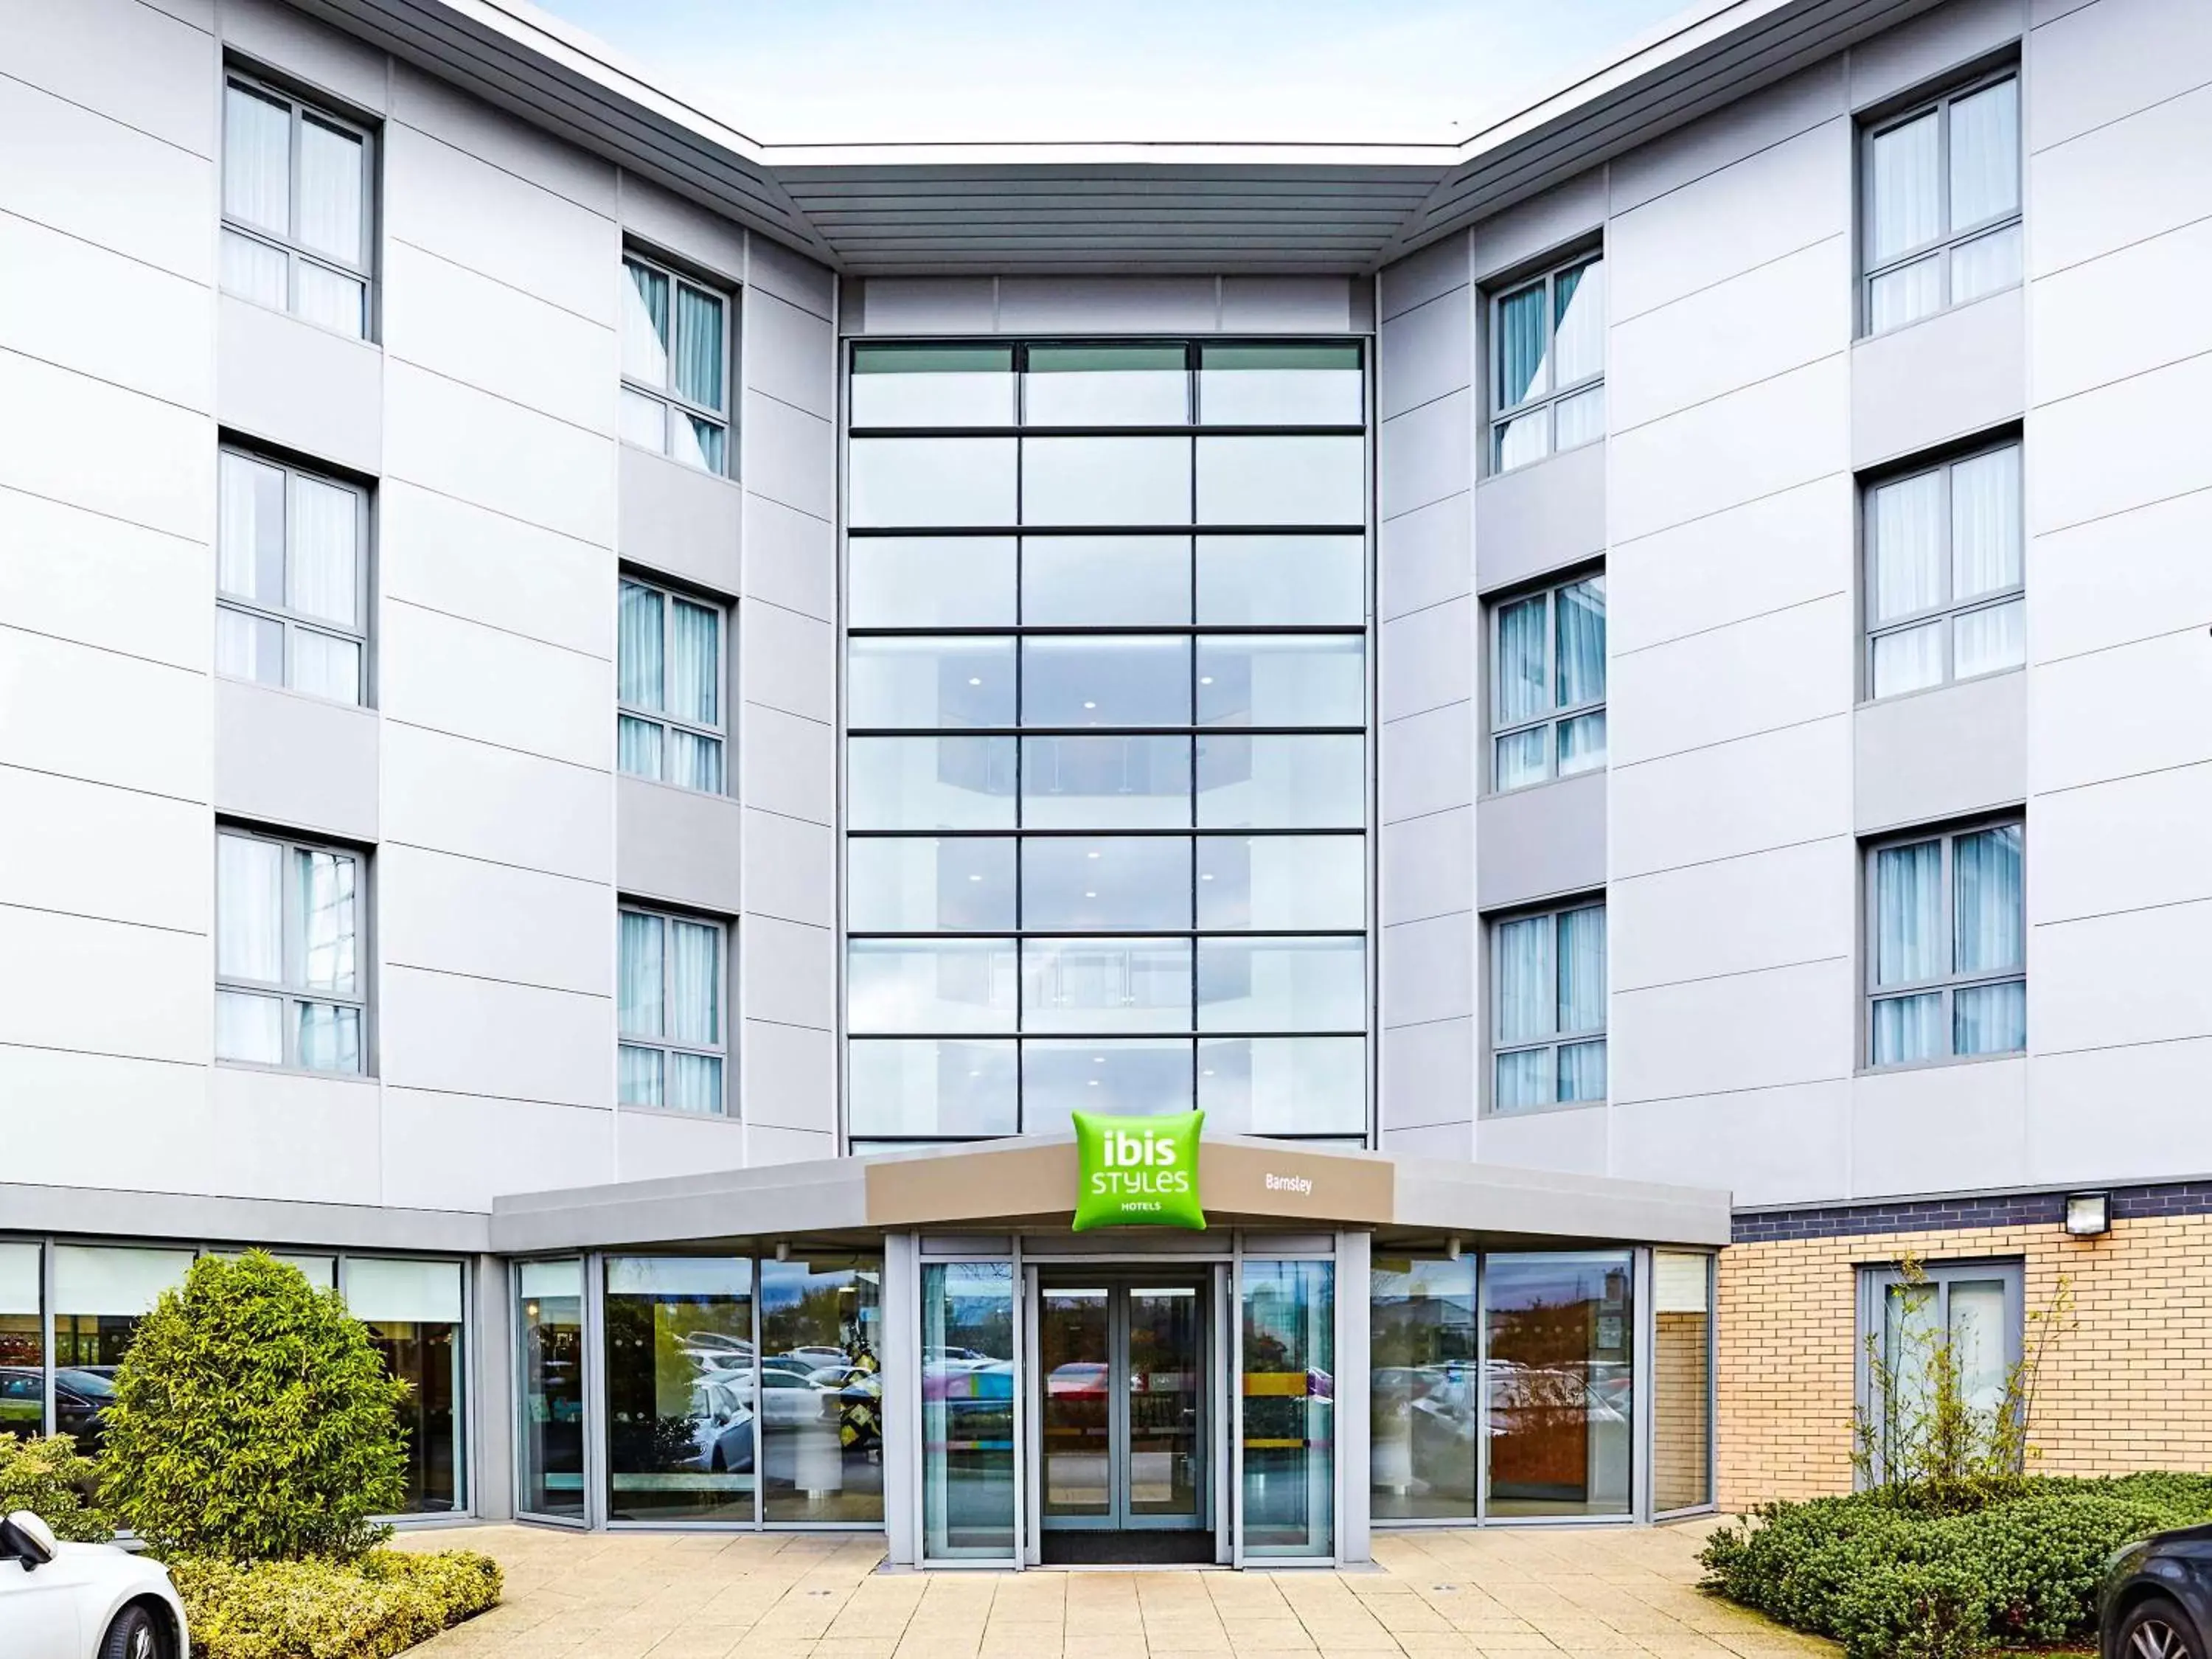 Property building in ibis Styles Barnsley